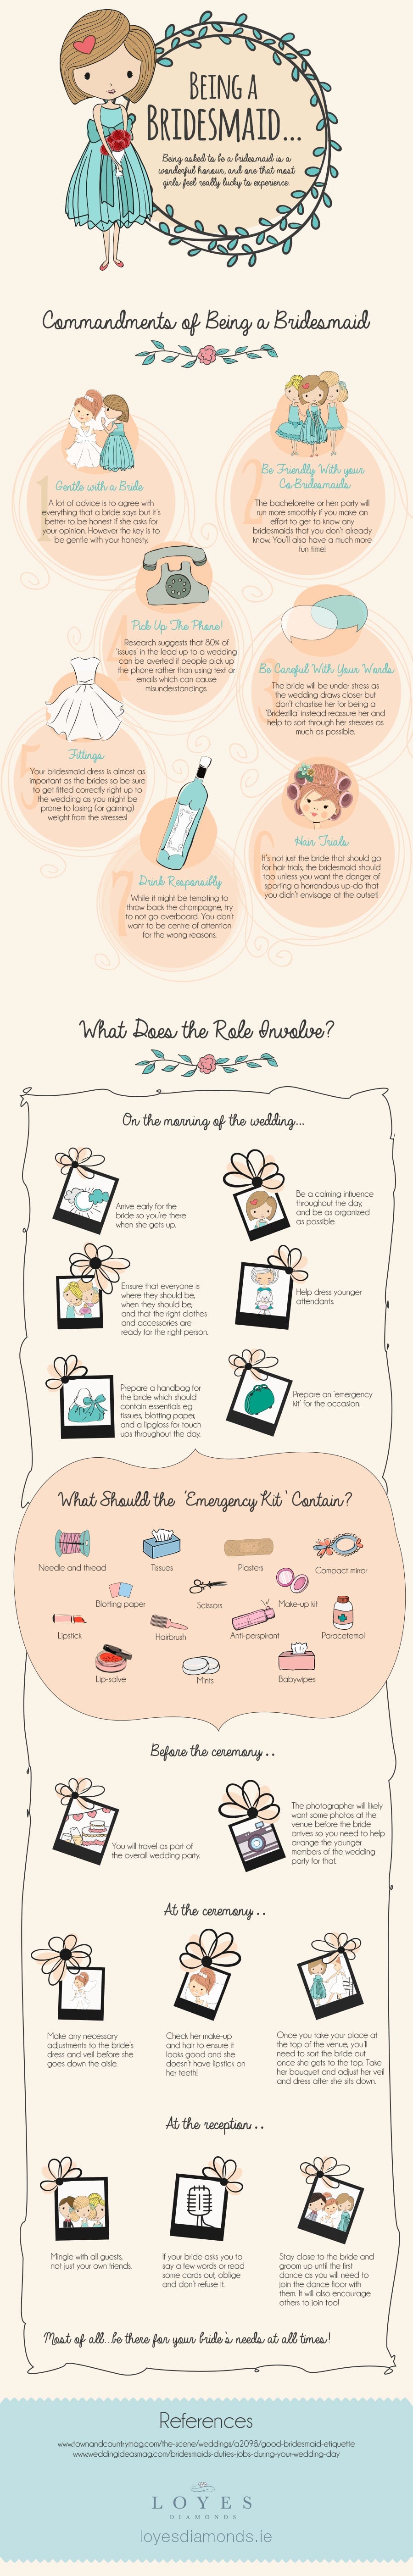 Being a Bridesmaid Infographic